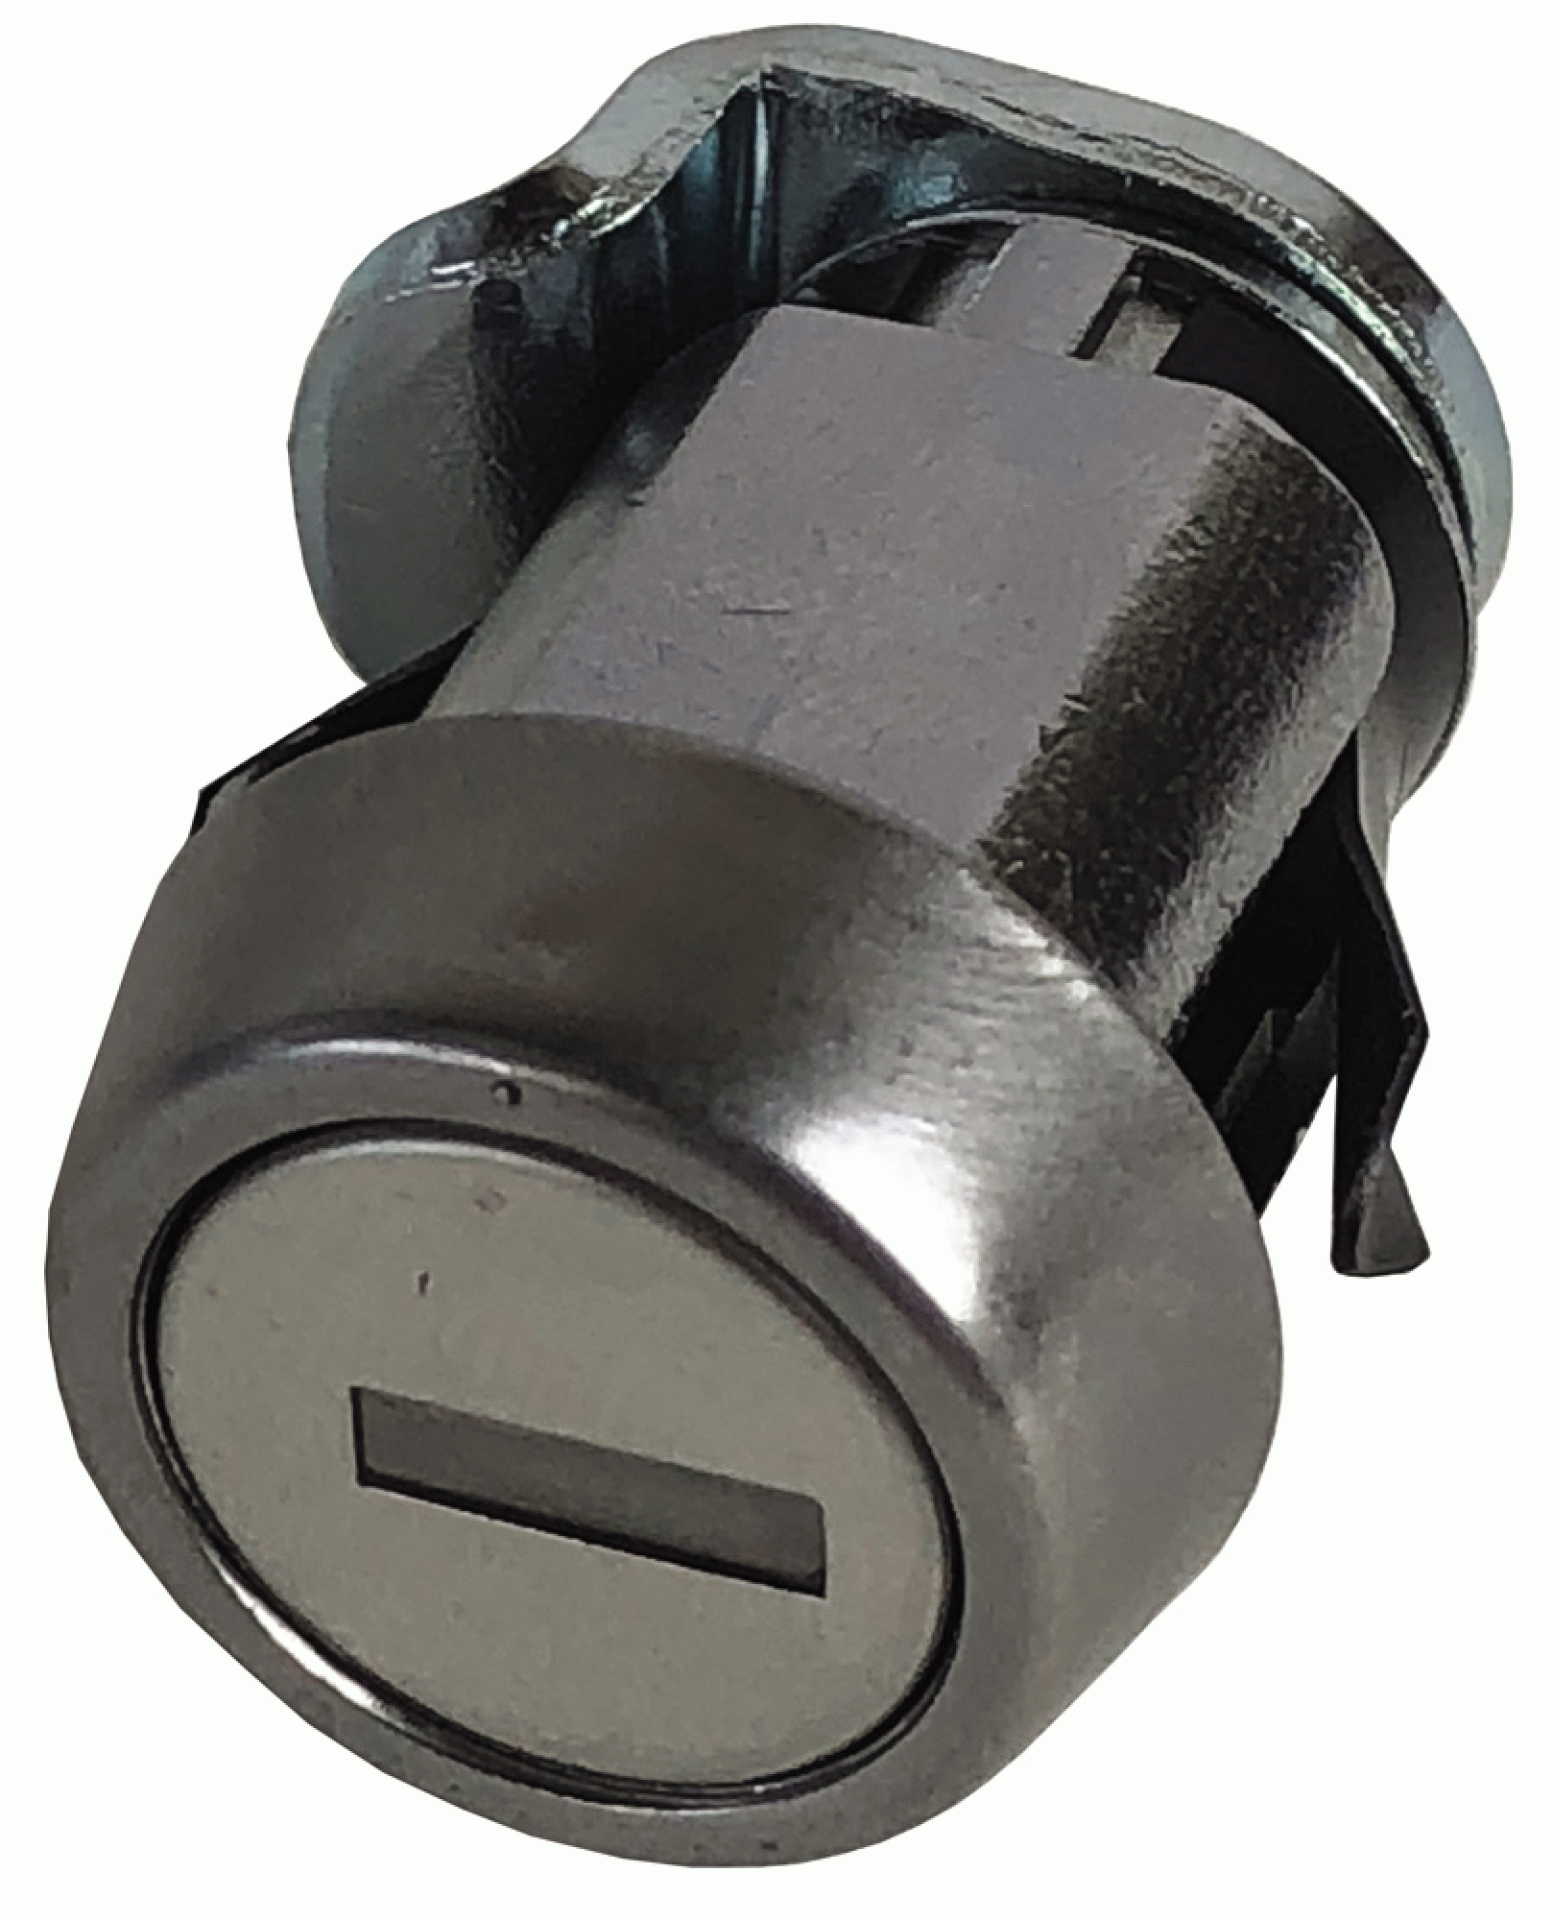 CREATIVE PRODUCTS GROUP | CLB-391-78SI-SS | Cam Lock 5/8" w/G-391 Key